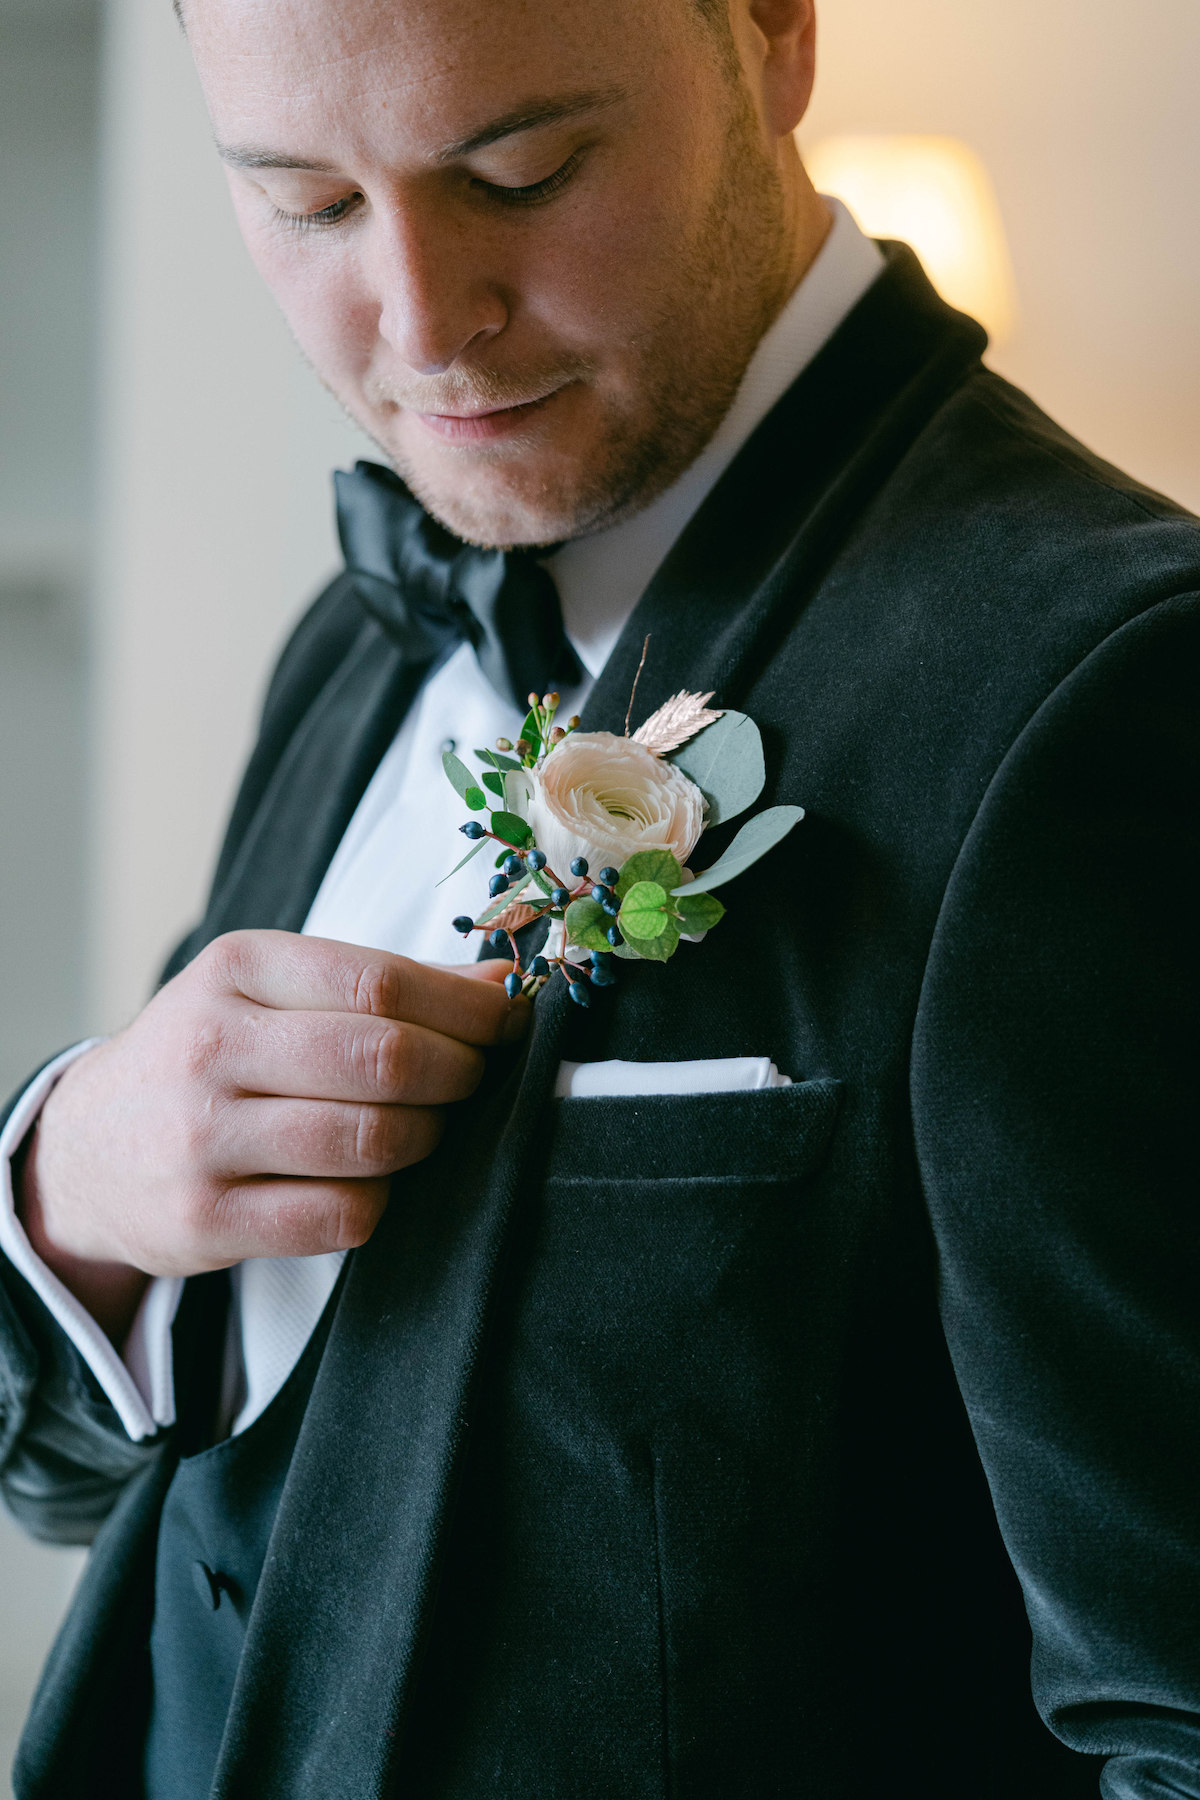 Merrion Hotel wedding boutonniere for groom